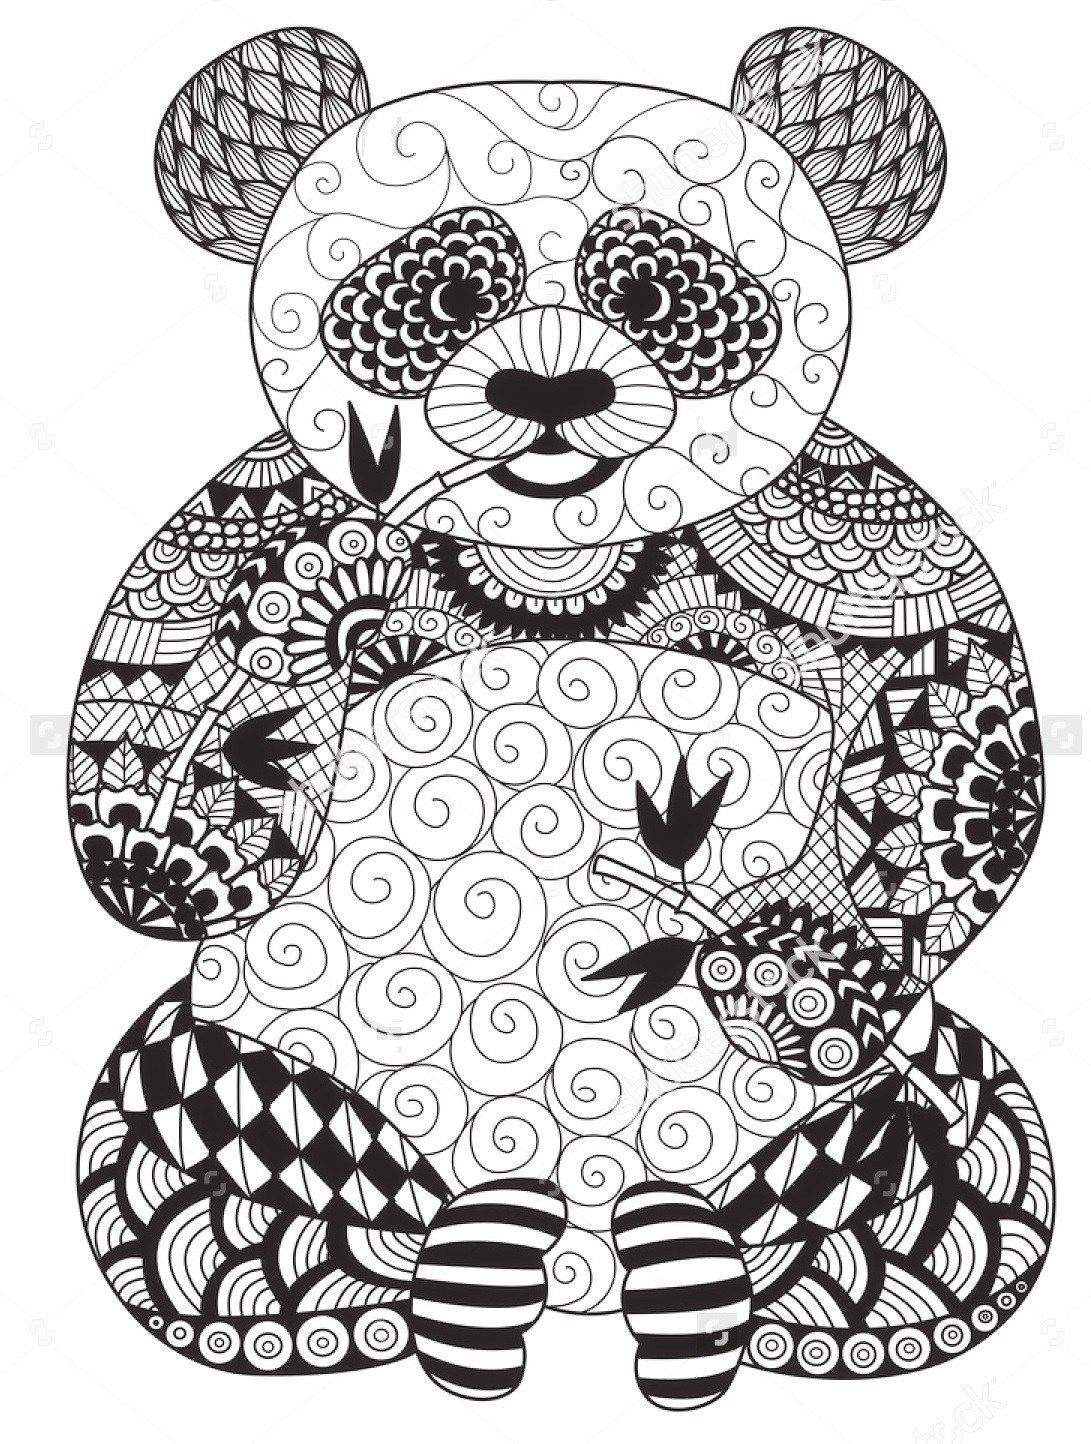 Panda Coloring Pages For Adults
 vector zentangle panda coloring page